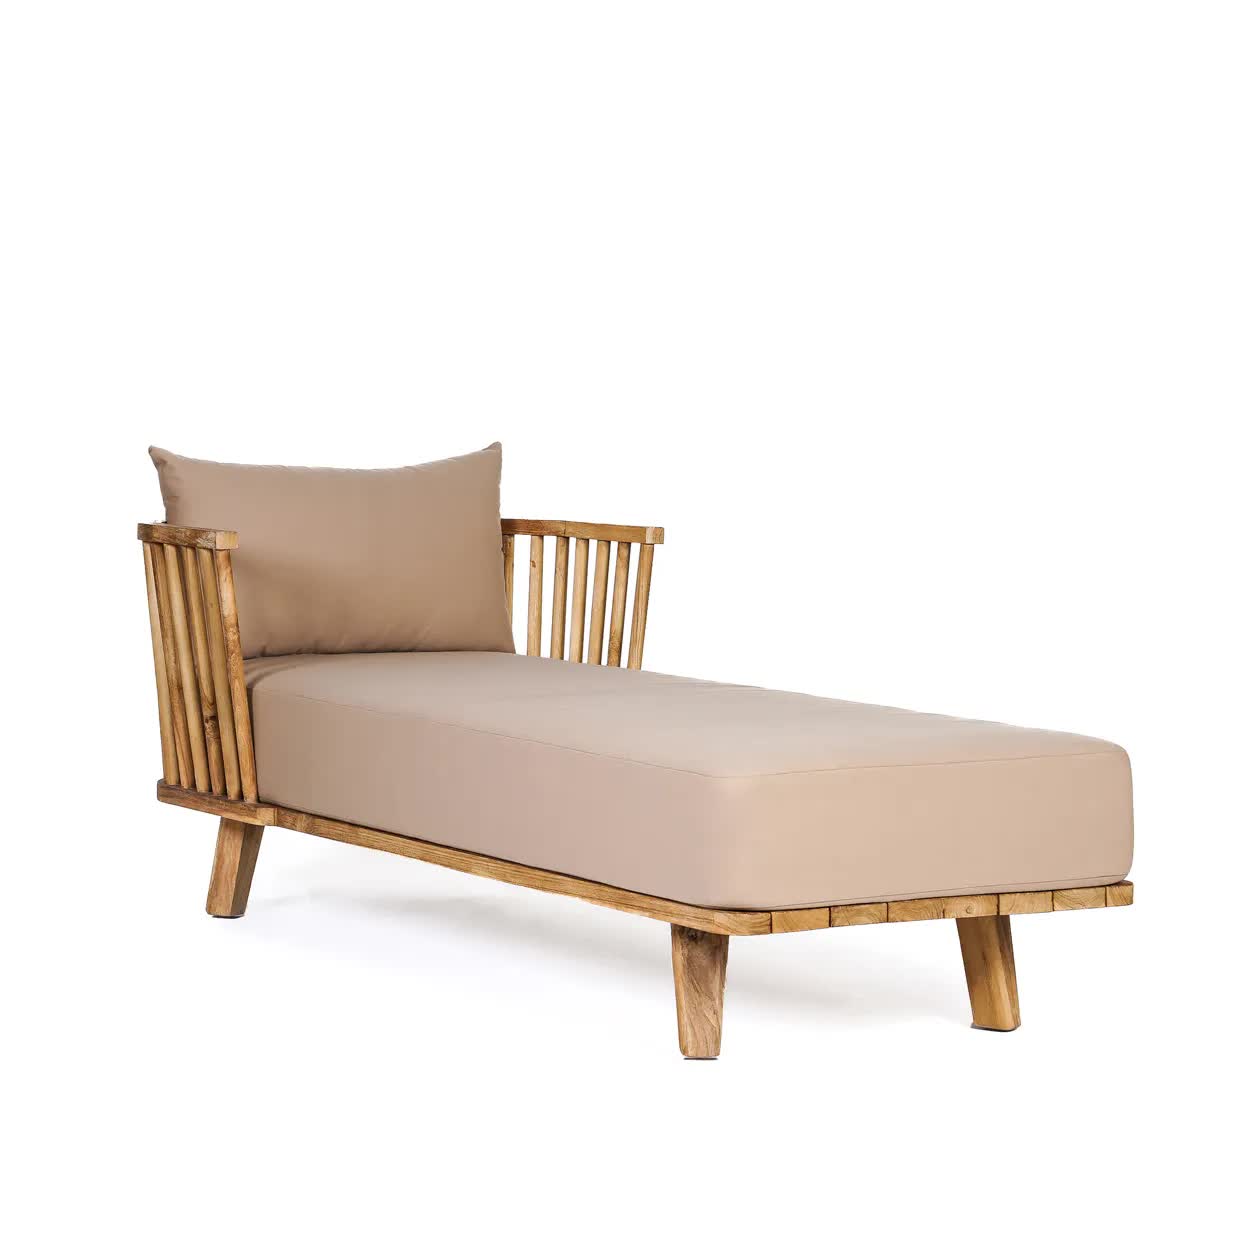 THE MALAWI Daybed Natural Sand